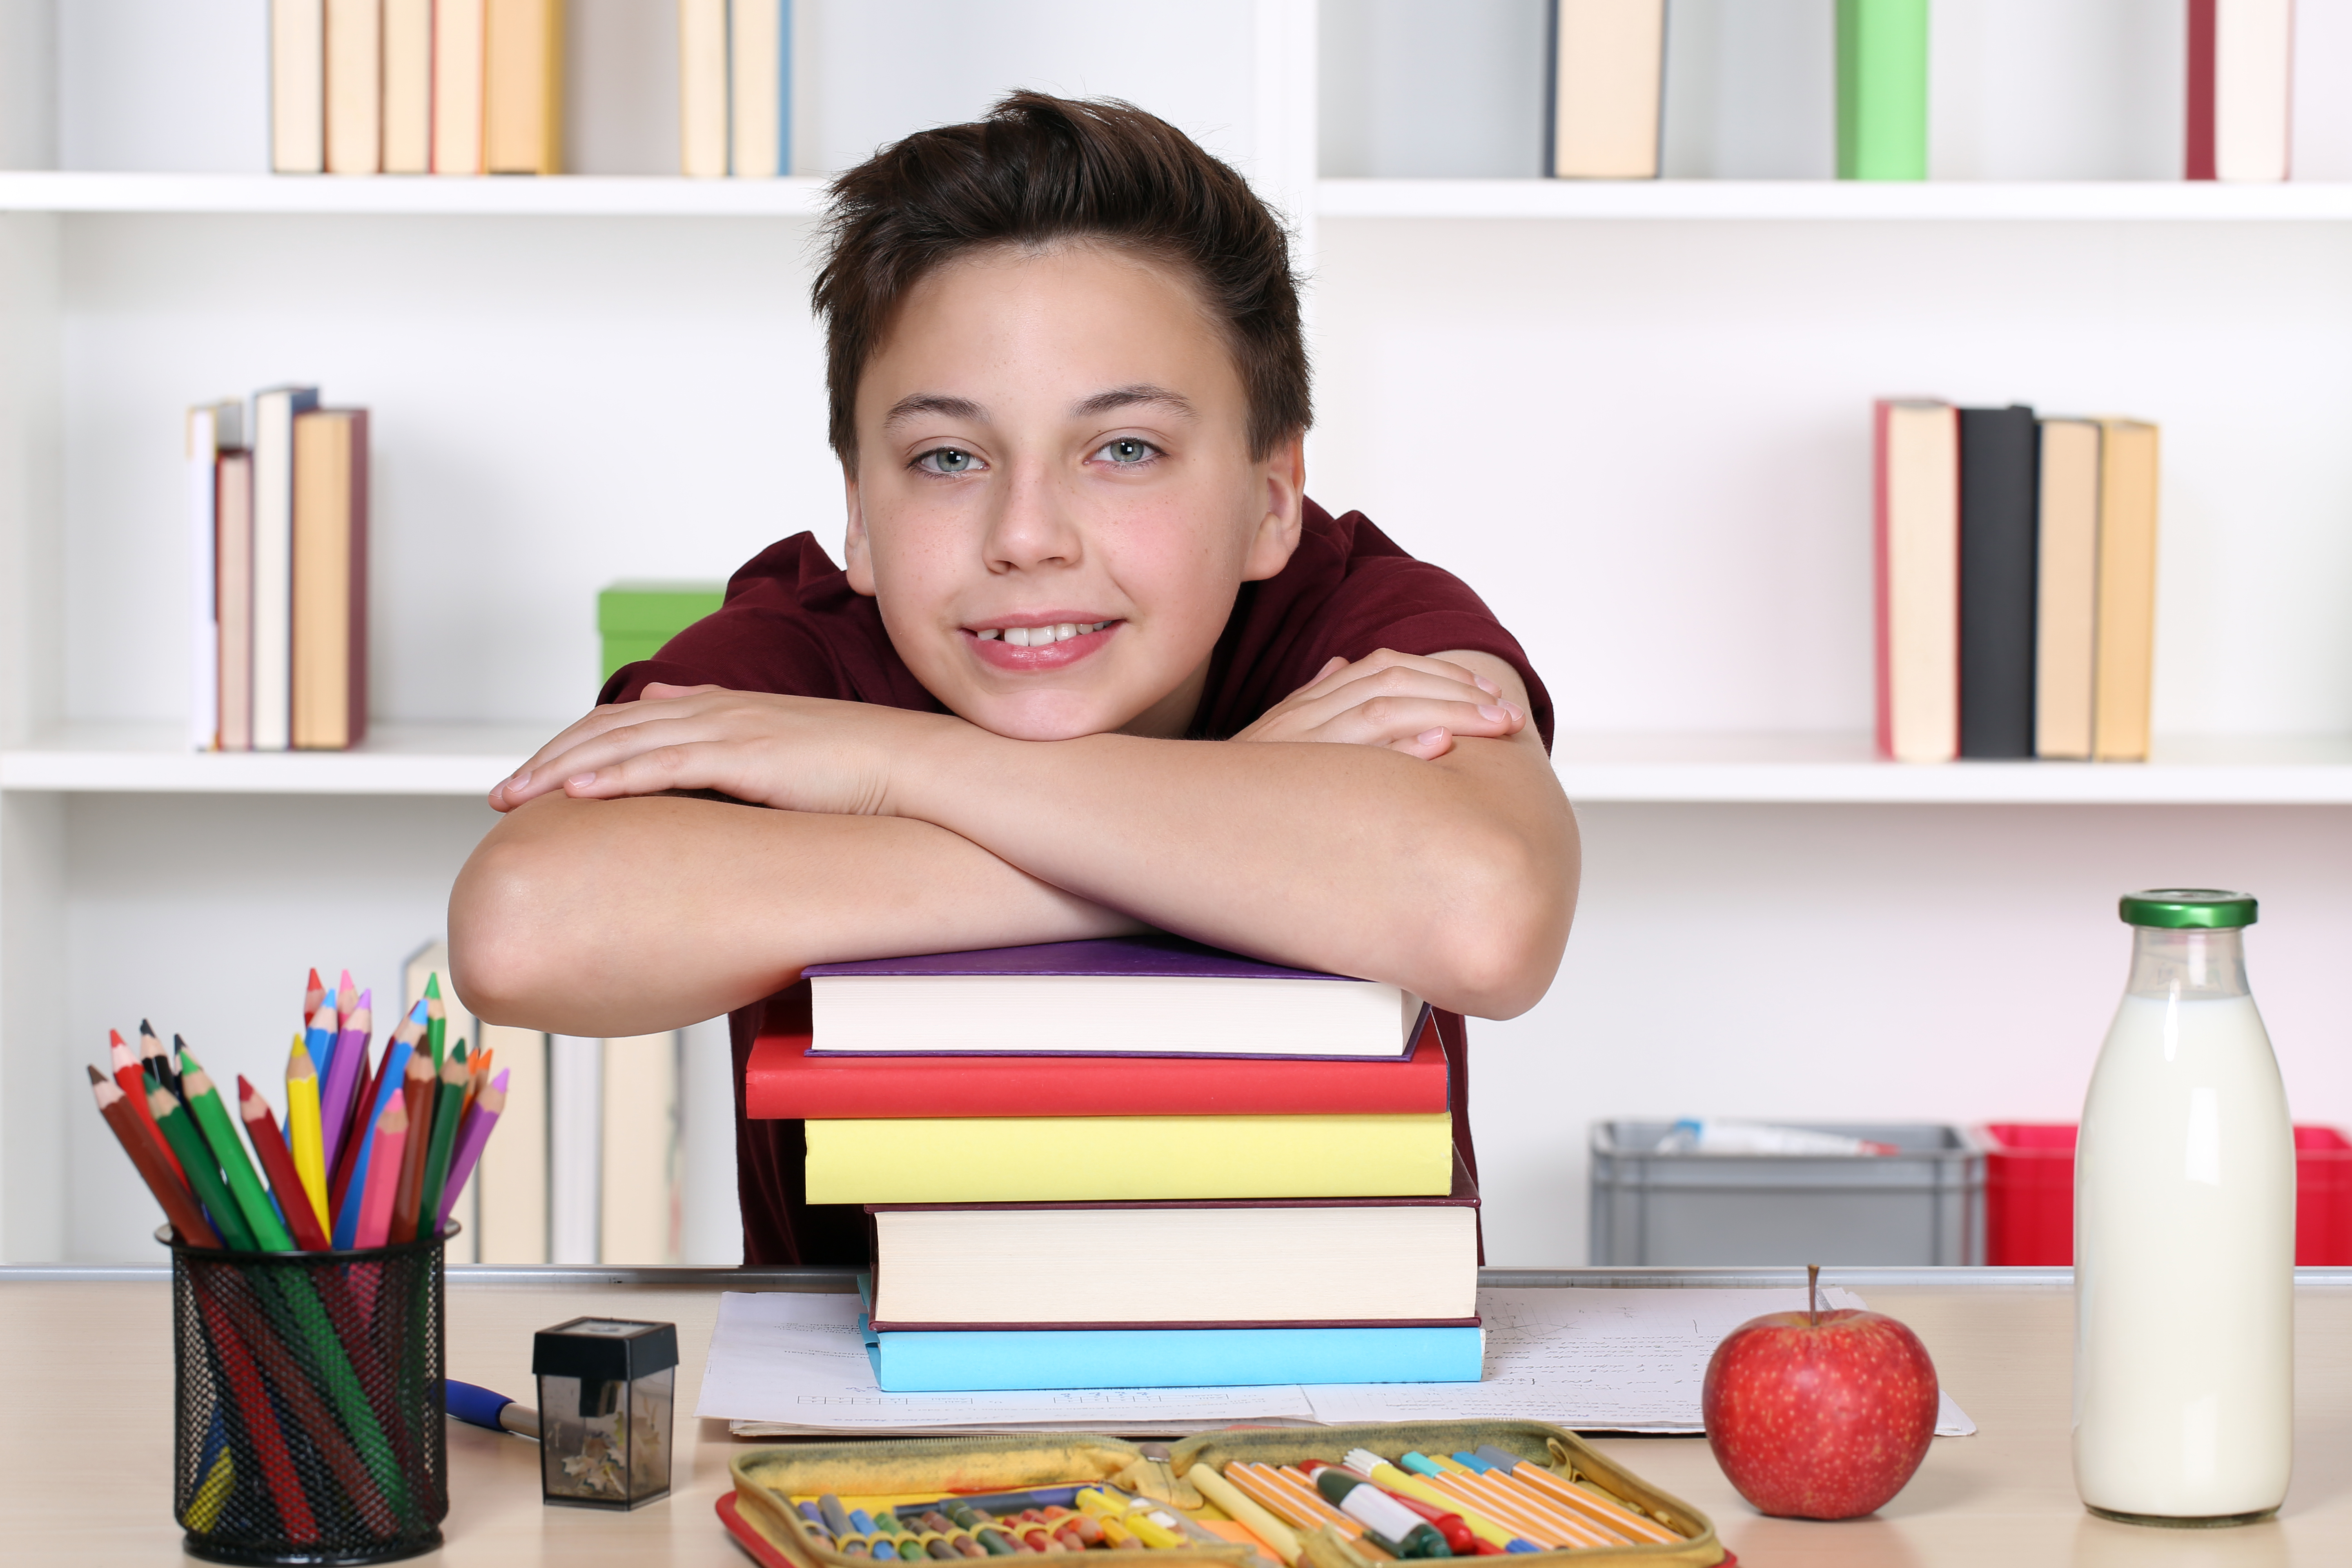 Boy with head on books